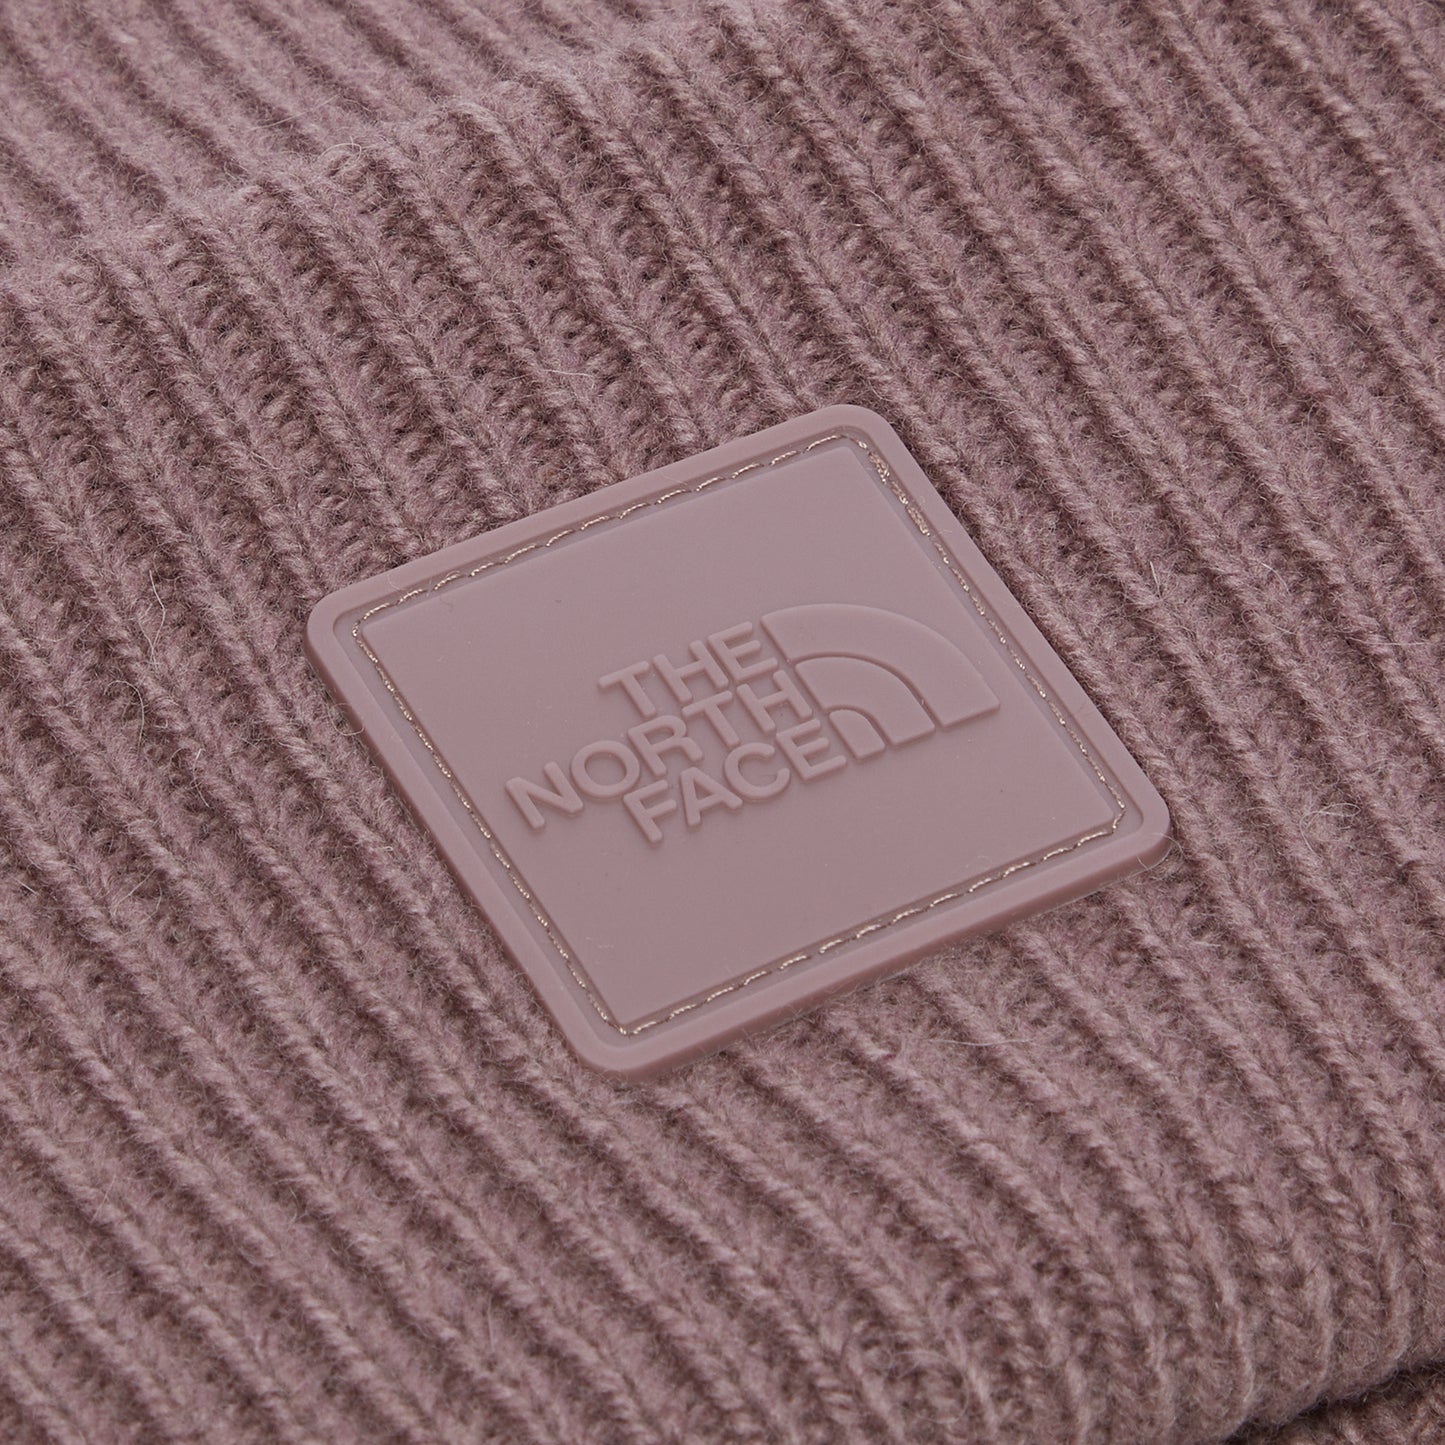 The North Face Urban Patch Beanie (Fawn Grey)